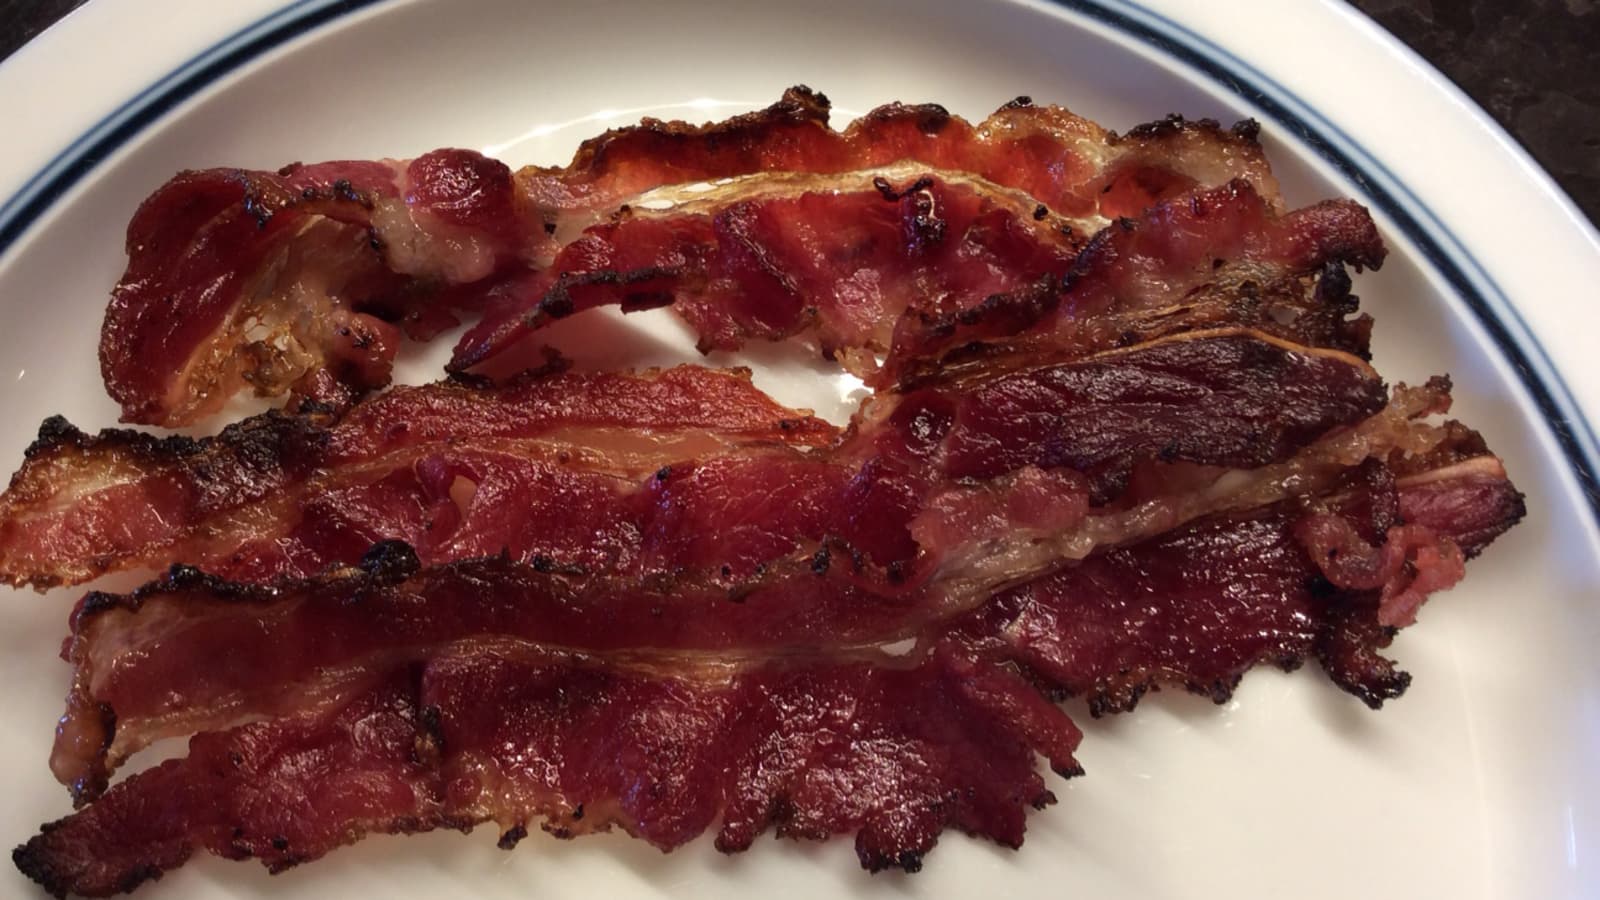 Schmacon: Bacon made from beef